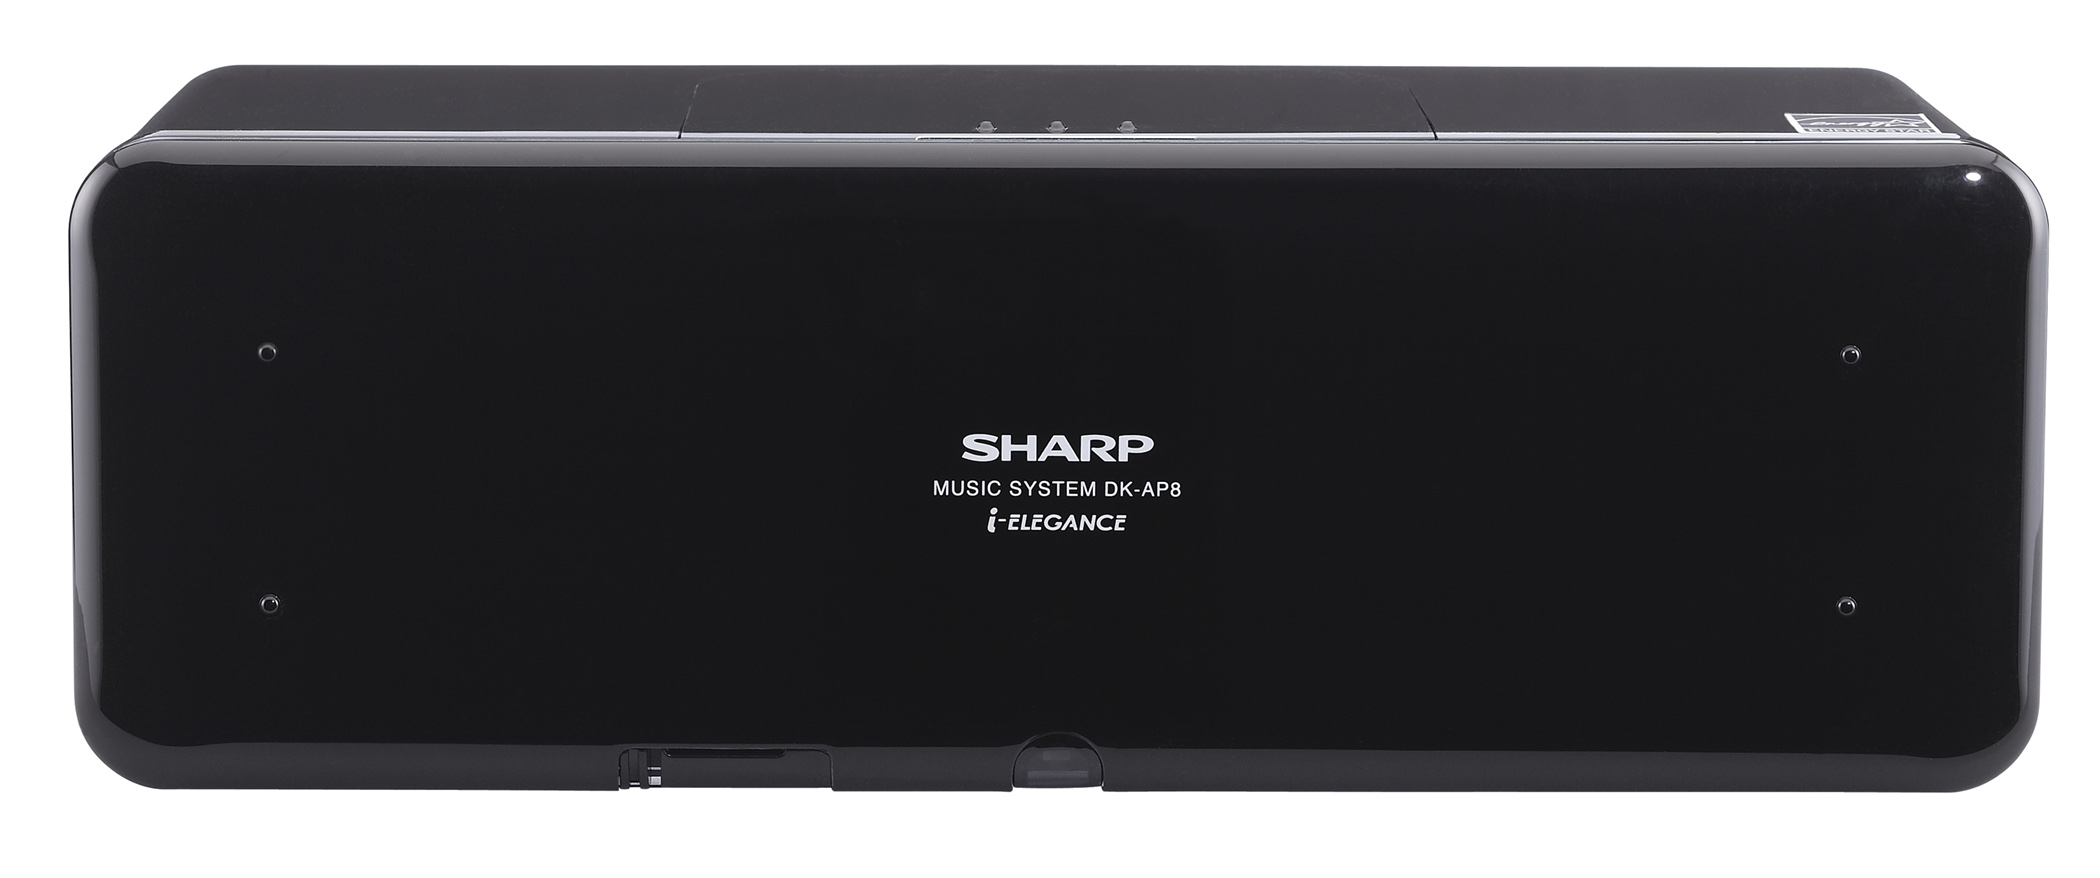 Fathers Day Gift Idea: Sharp DK-AP8P Music System